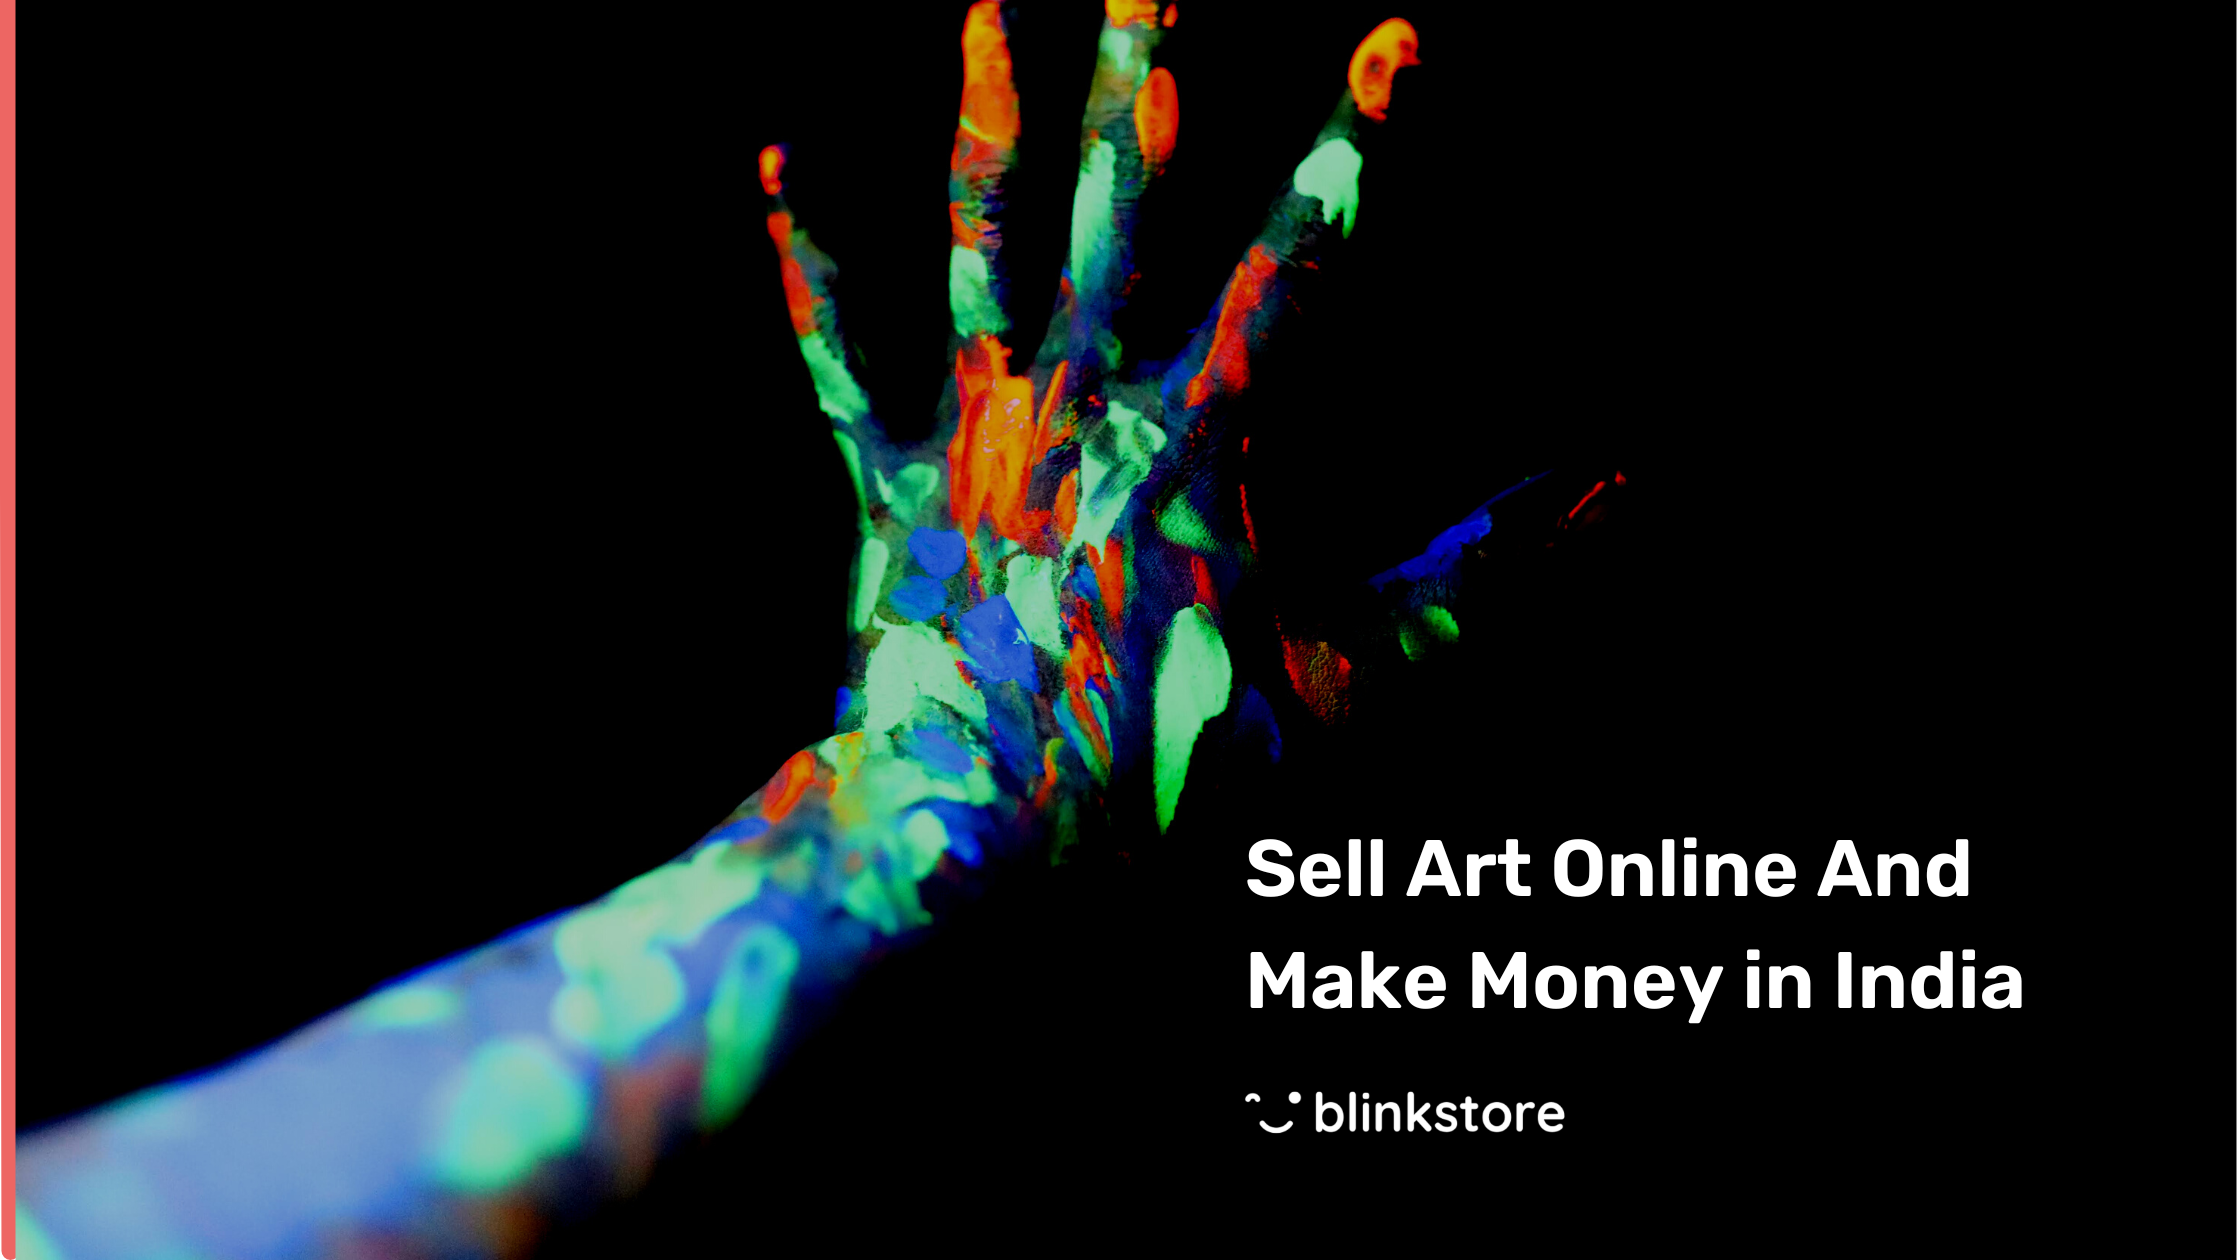 How To Sell Art Online And Make Money in India